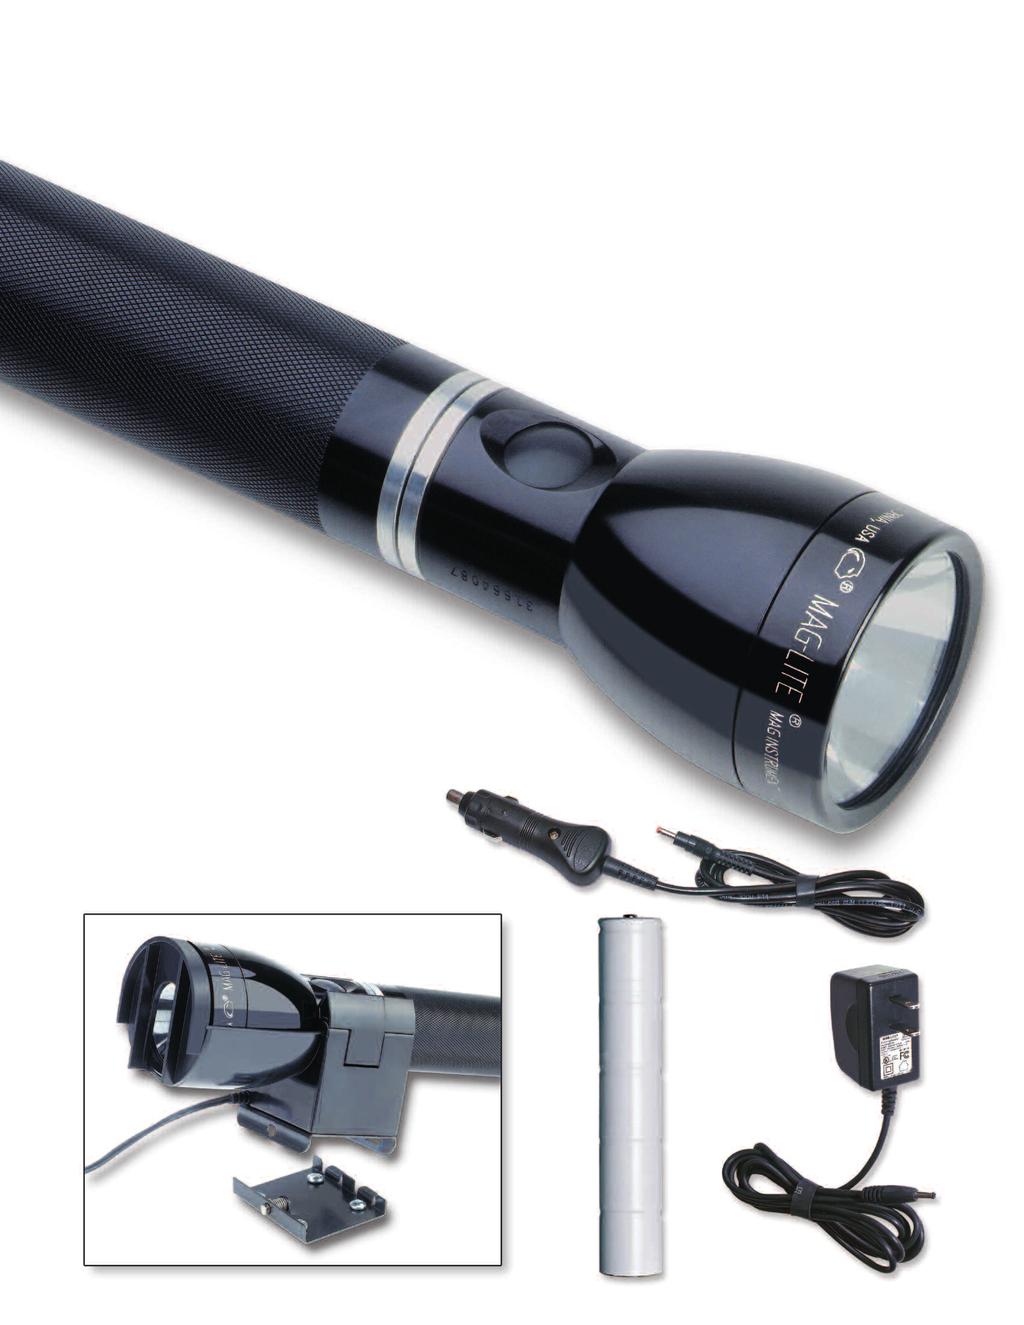 MAG CHARGER RECHARGEABLE FLASHLIGHT SYSTEM (NiMH) Now, Improved Performance F E A T U R E S with a High Capacity Rechargeable NiMH Battery!* Without question, our ultimate lighting tool.